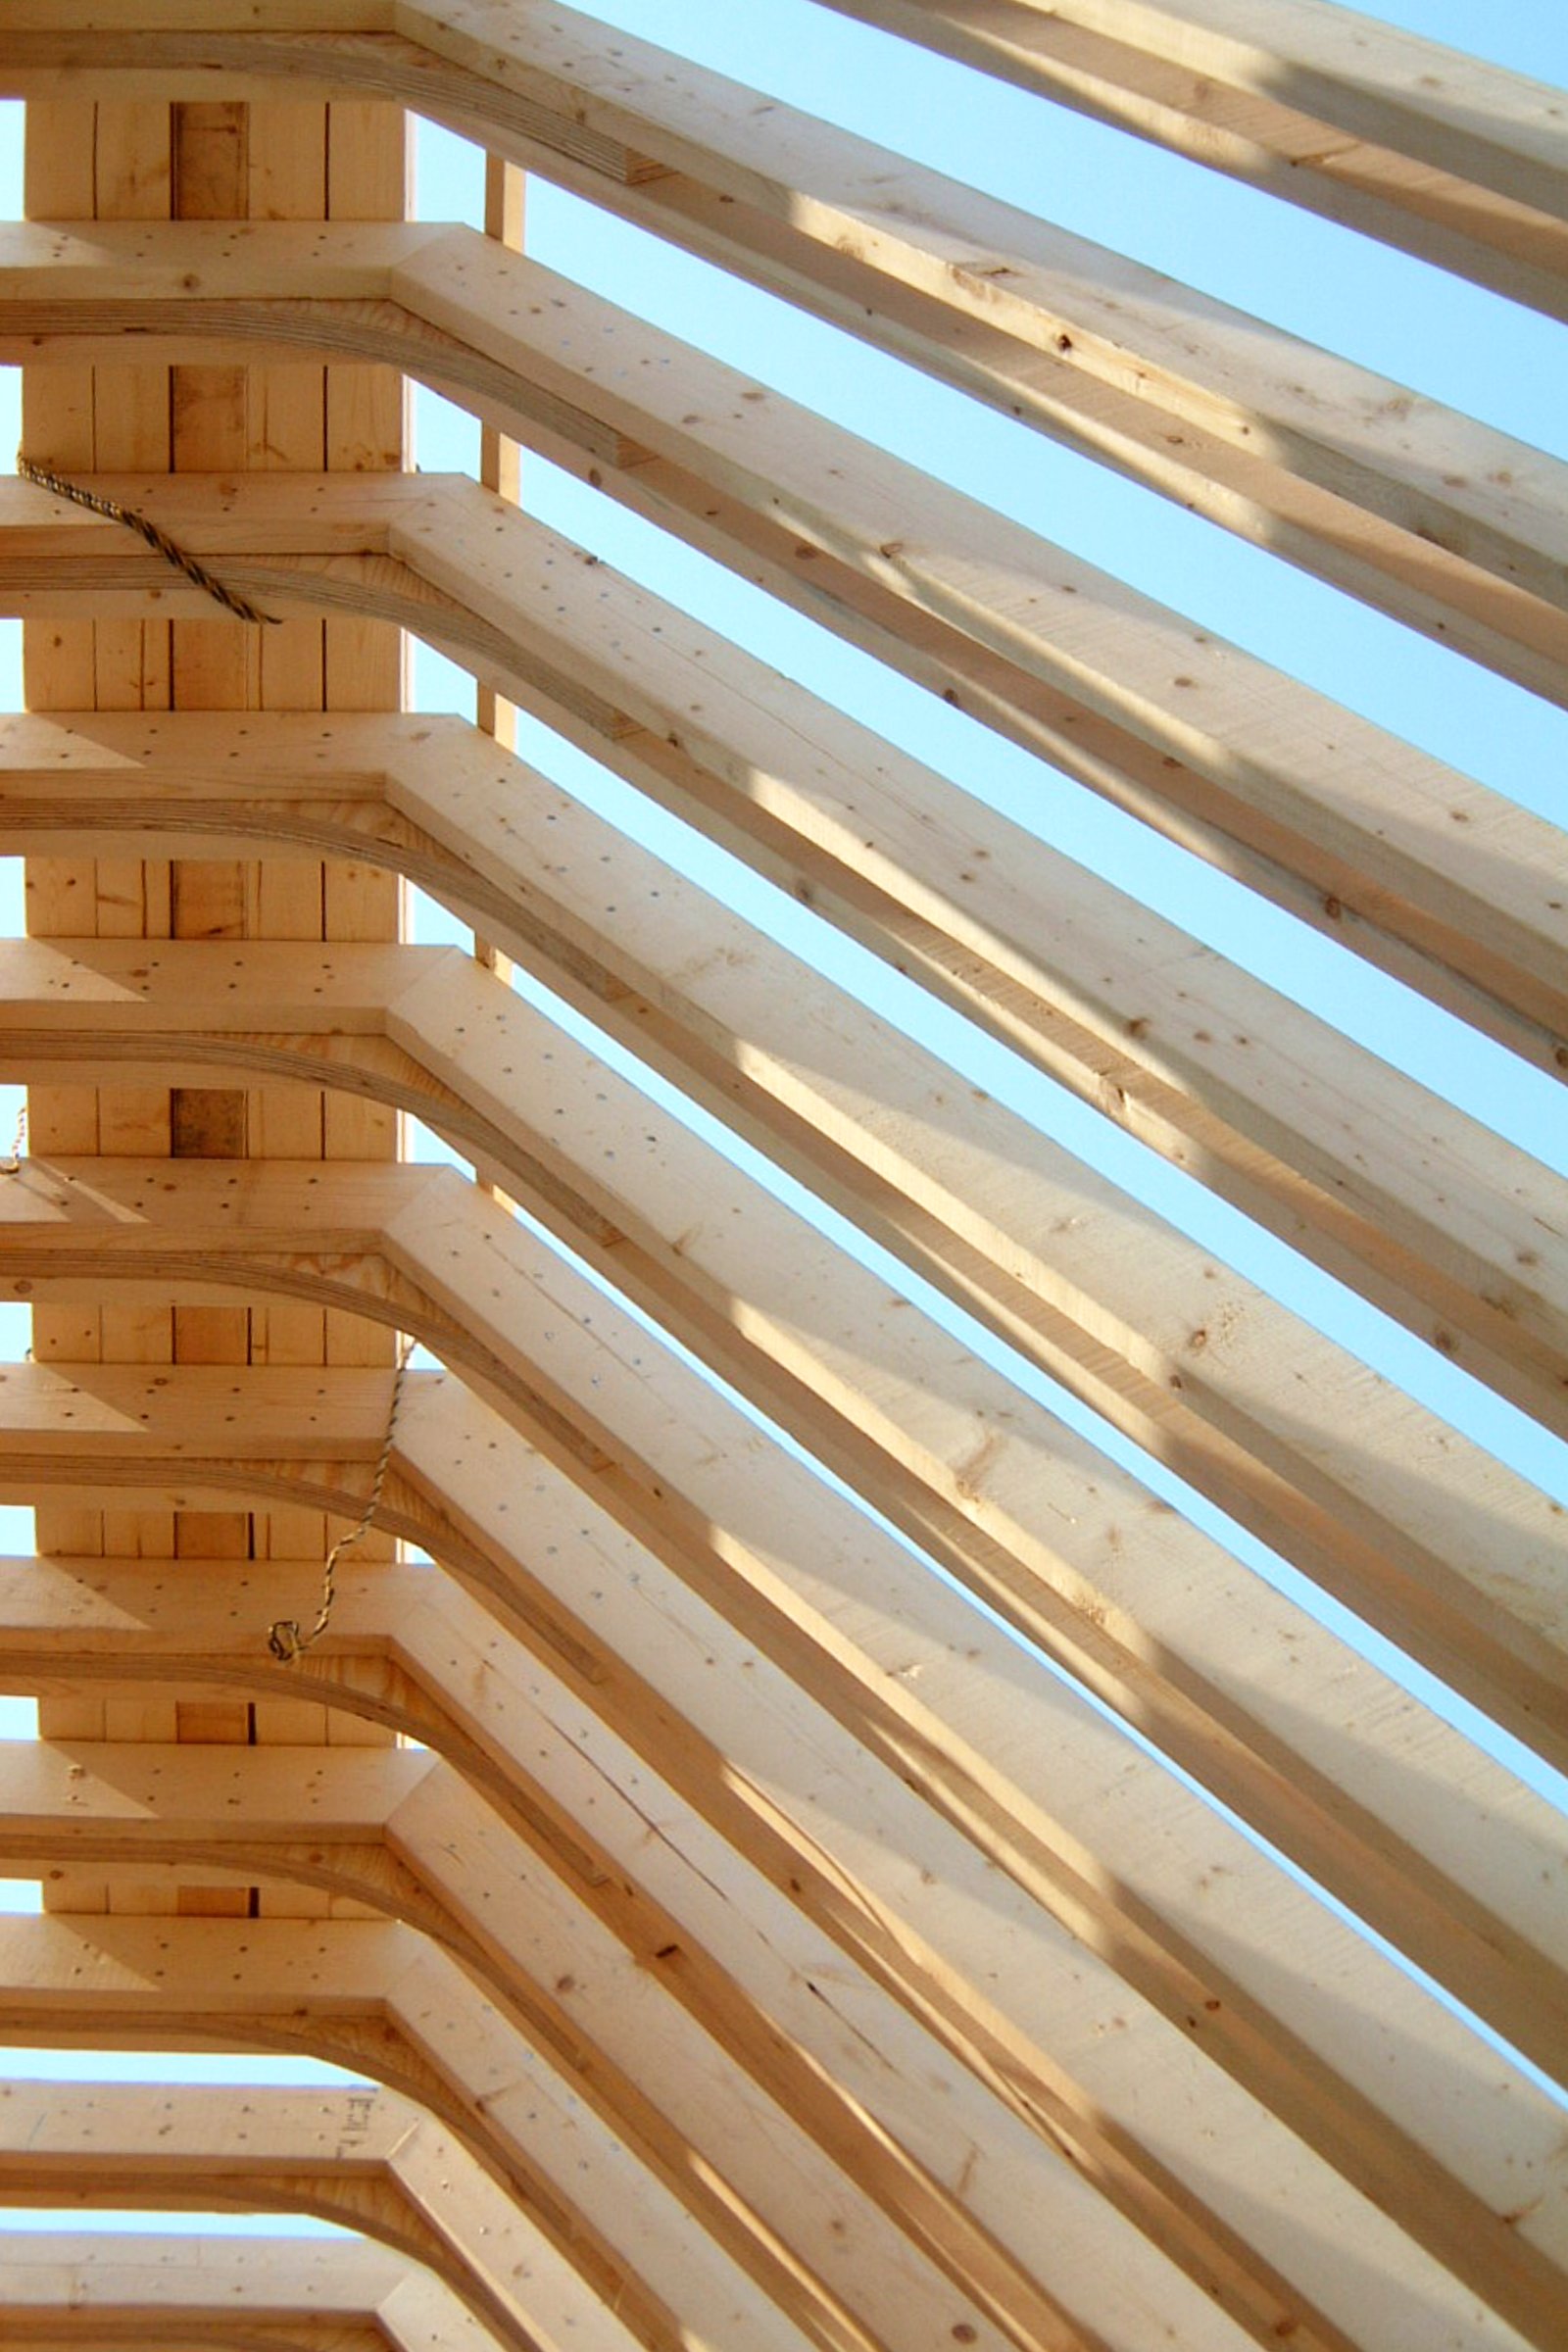 Daita House Private House Flitched Timber Rafters - 12.JPG